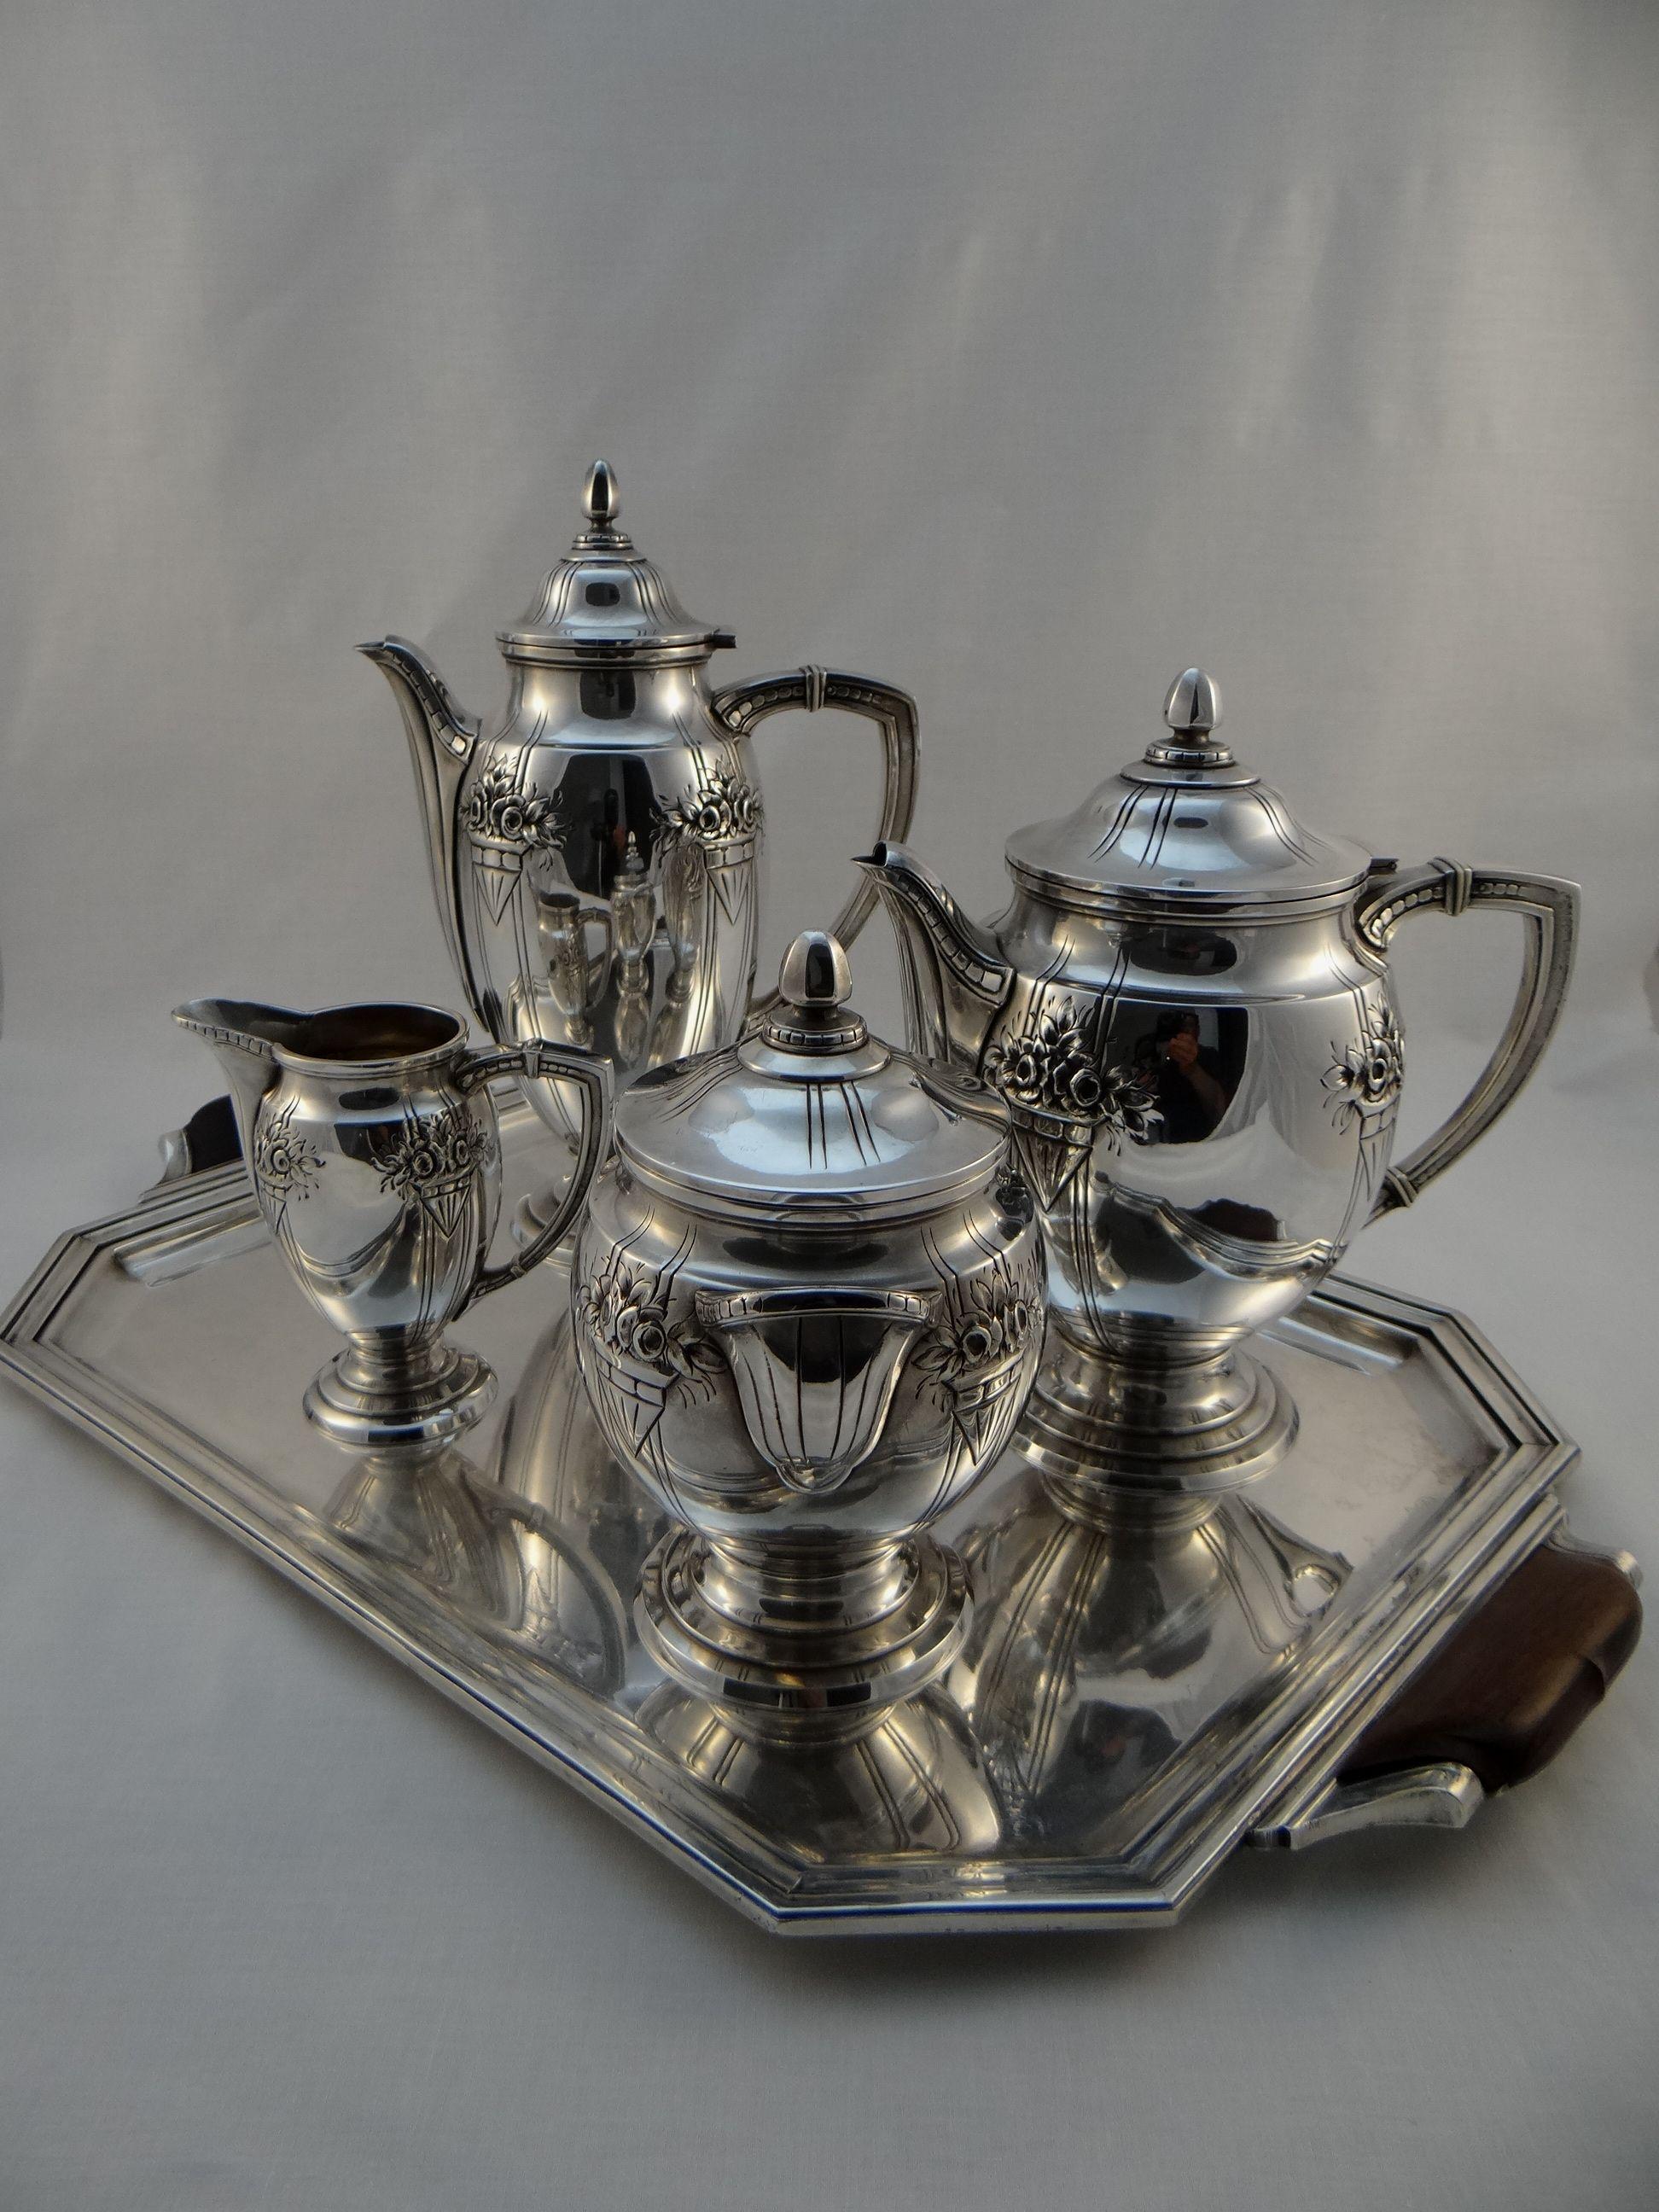 Beautiful silver tea / coffee service from the end of the Art Nouveau era decorated with garlands of flowers. Stamped by François Frionnet, this service includes a teapot, a coffee maker, a sugar bowl and a sugar pot. The high silver content gives